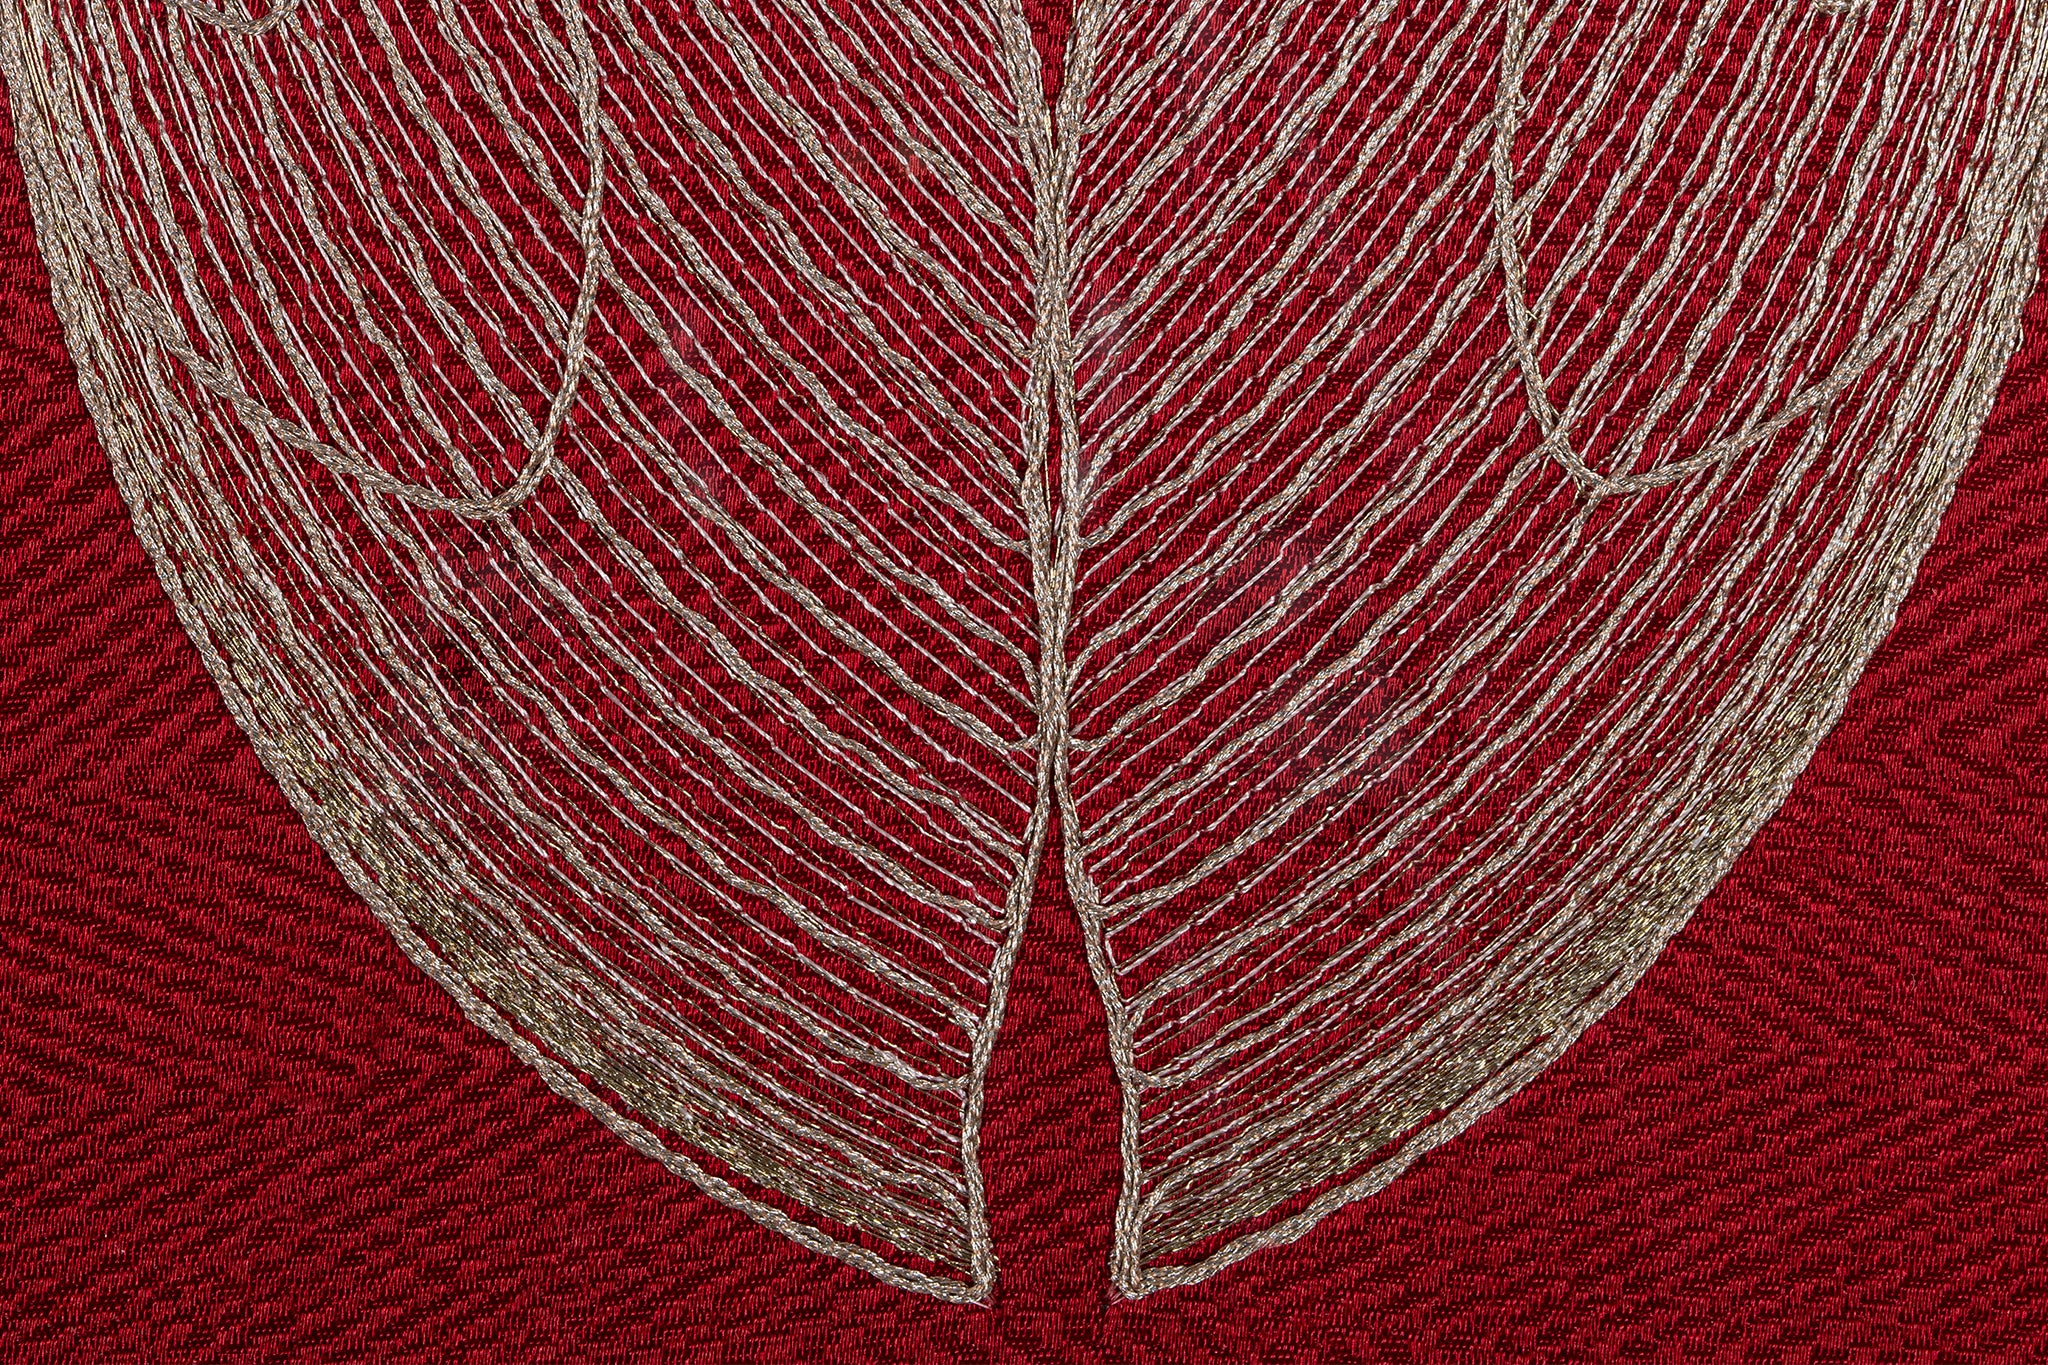 Close-up of the wing details of a framed embroidery artwork featuring a cicada design. The embroidery shows detailed patterns in white thread on a red background.